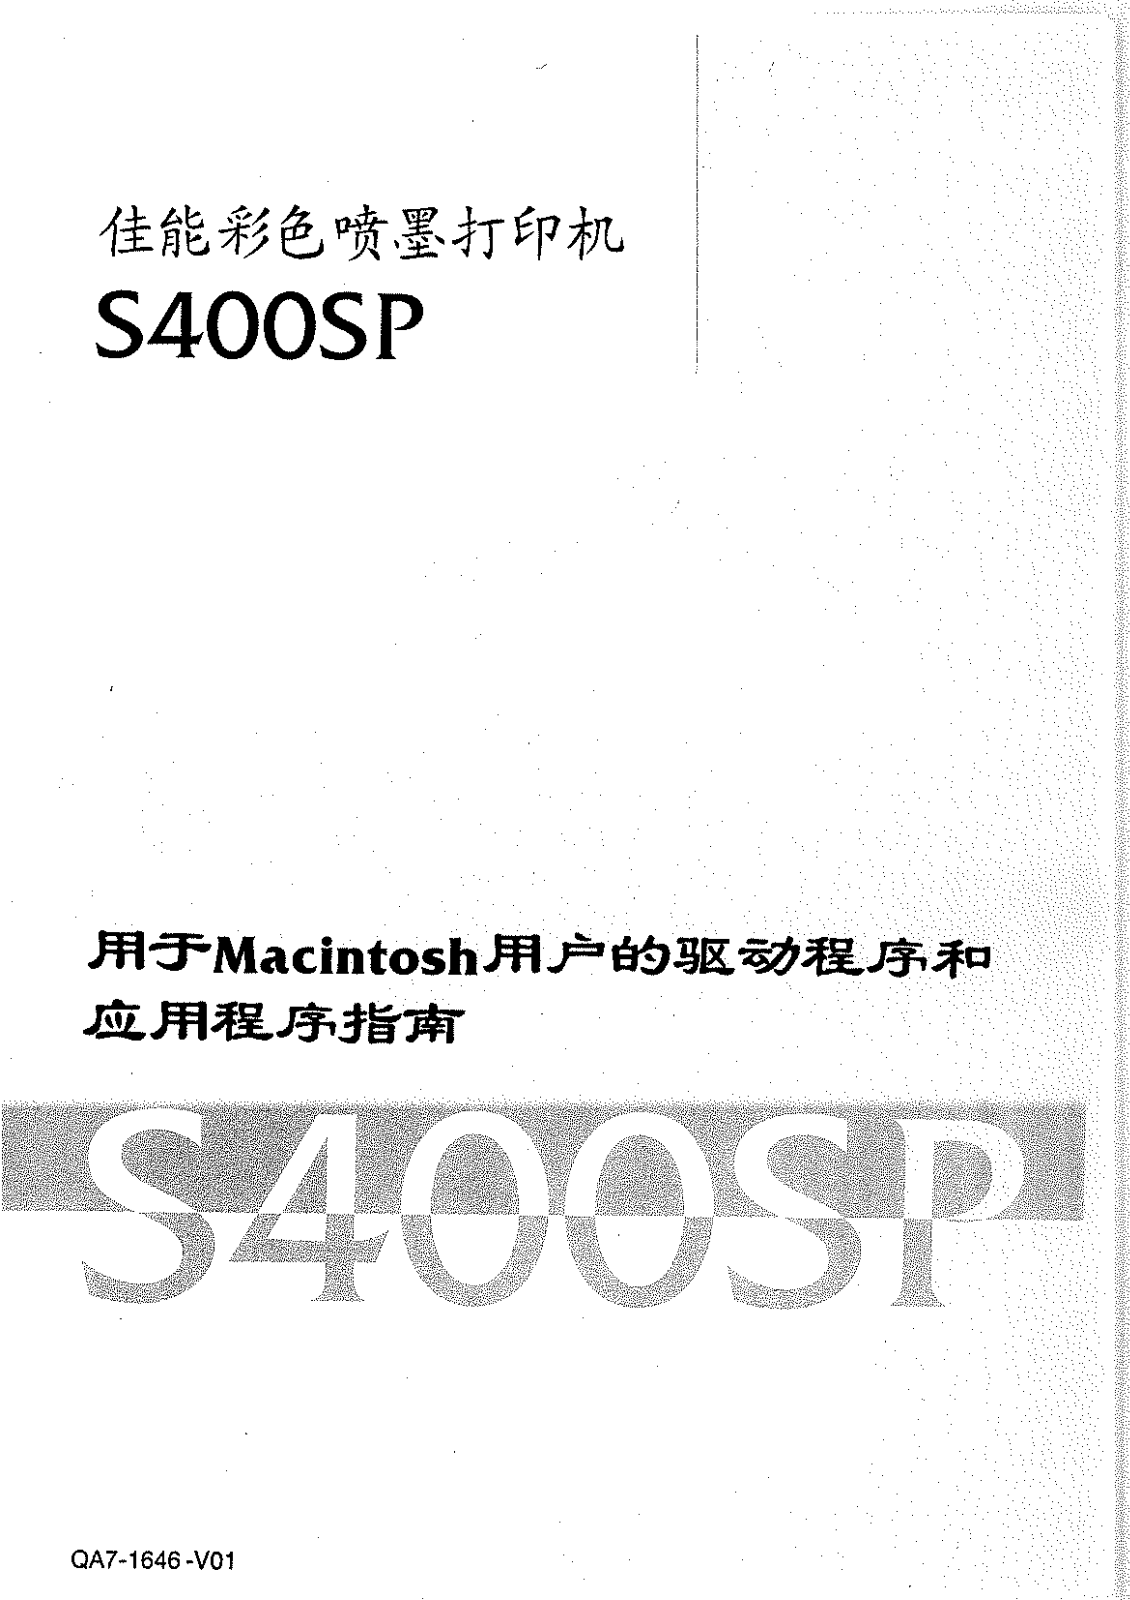 Canon S400SP User Manual